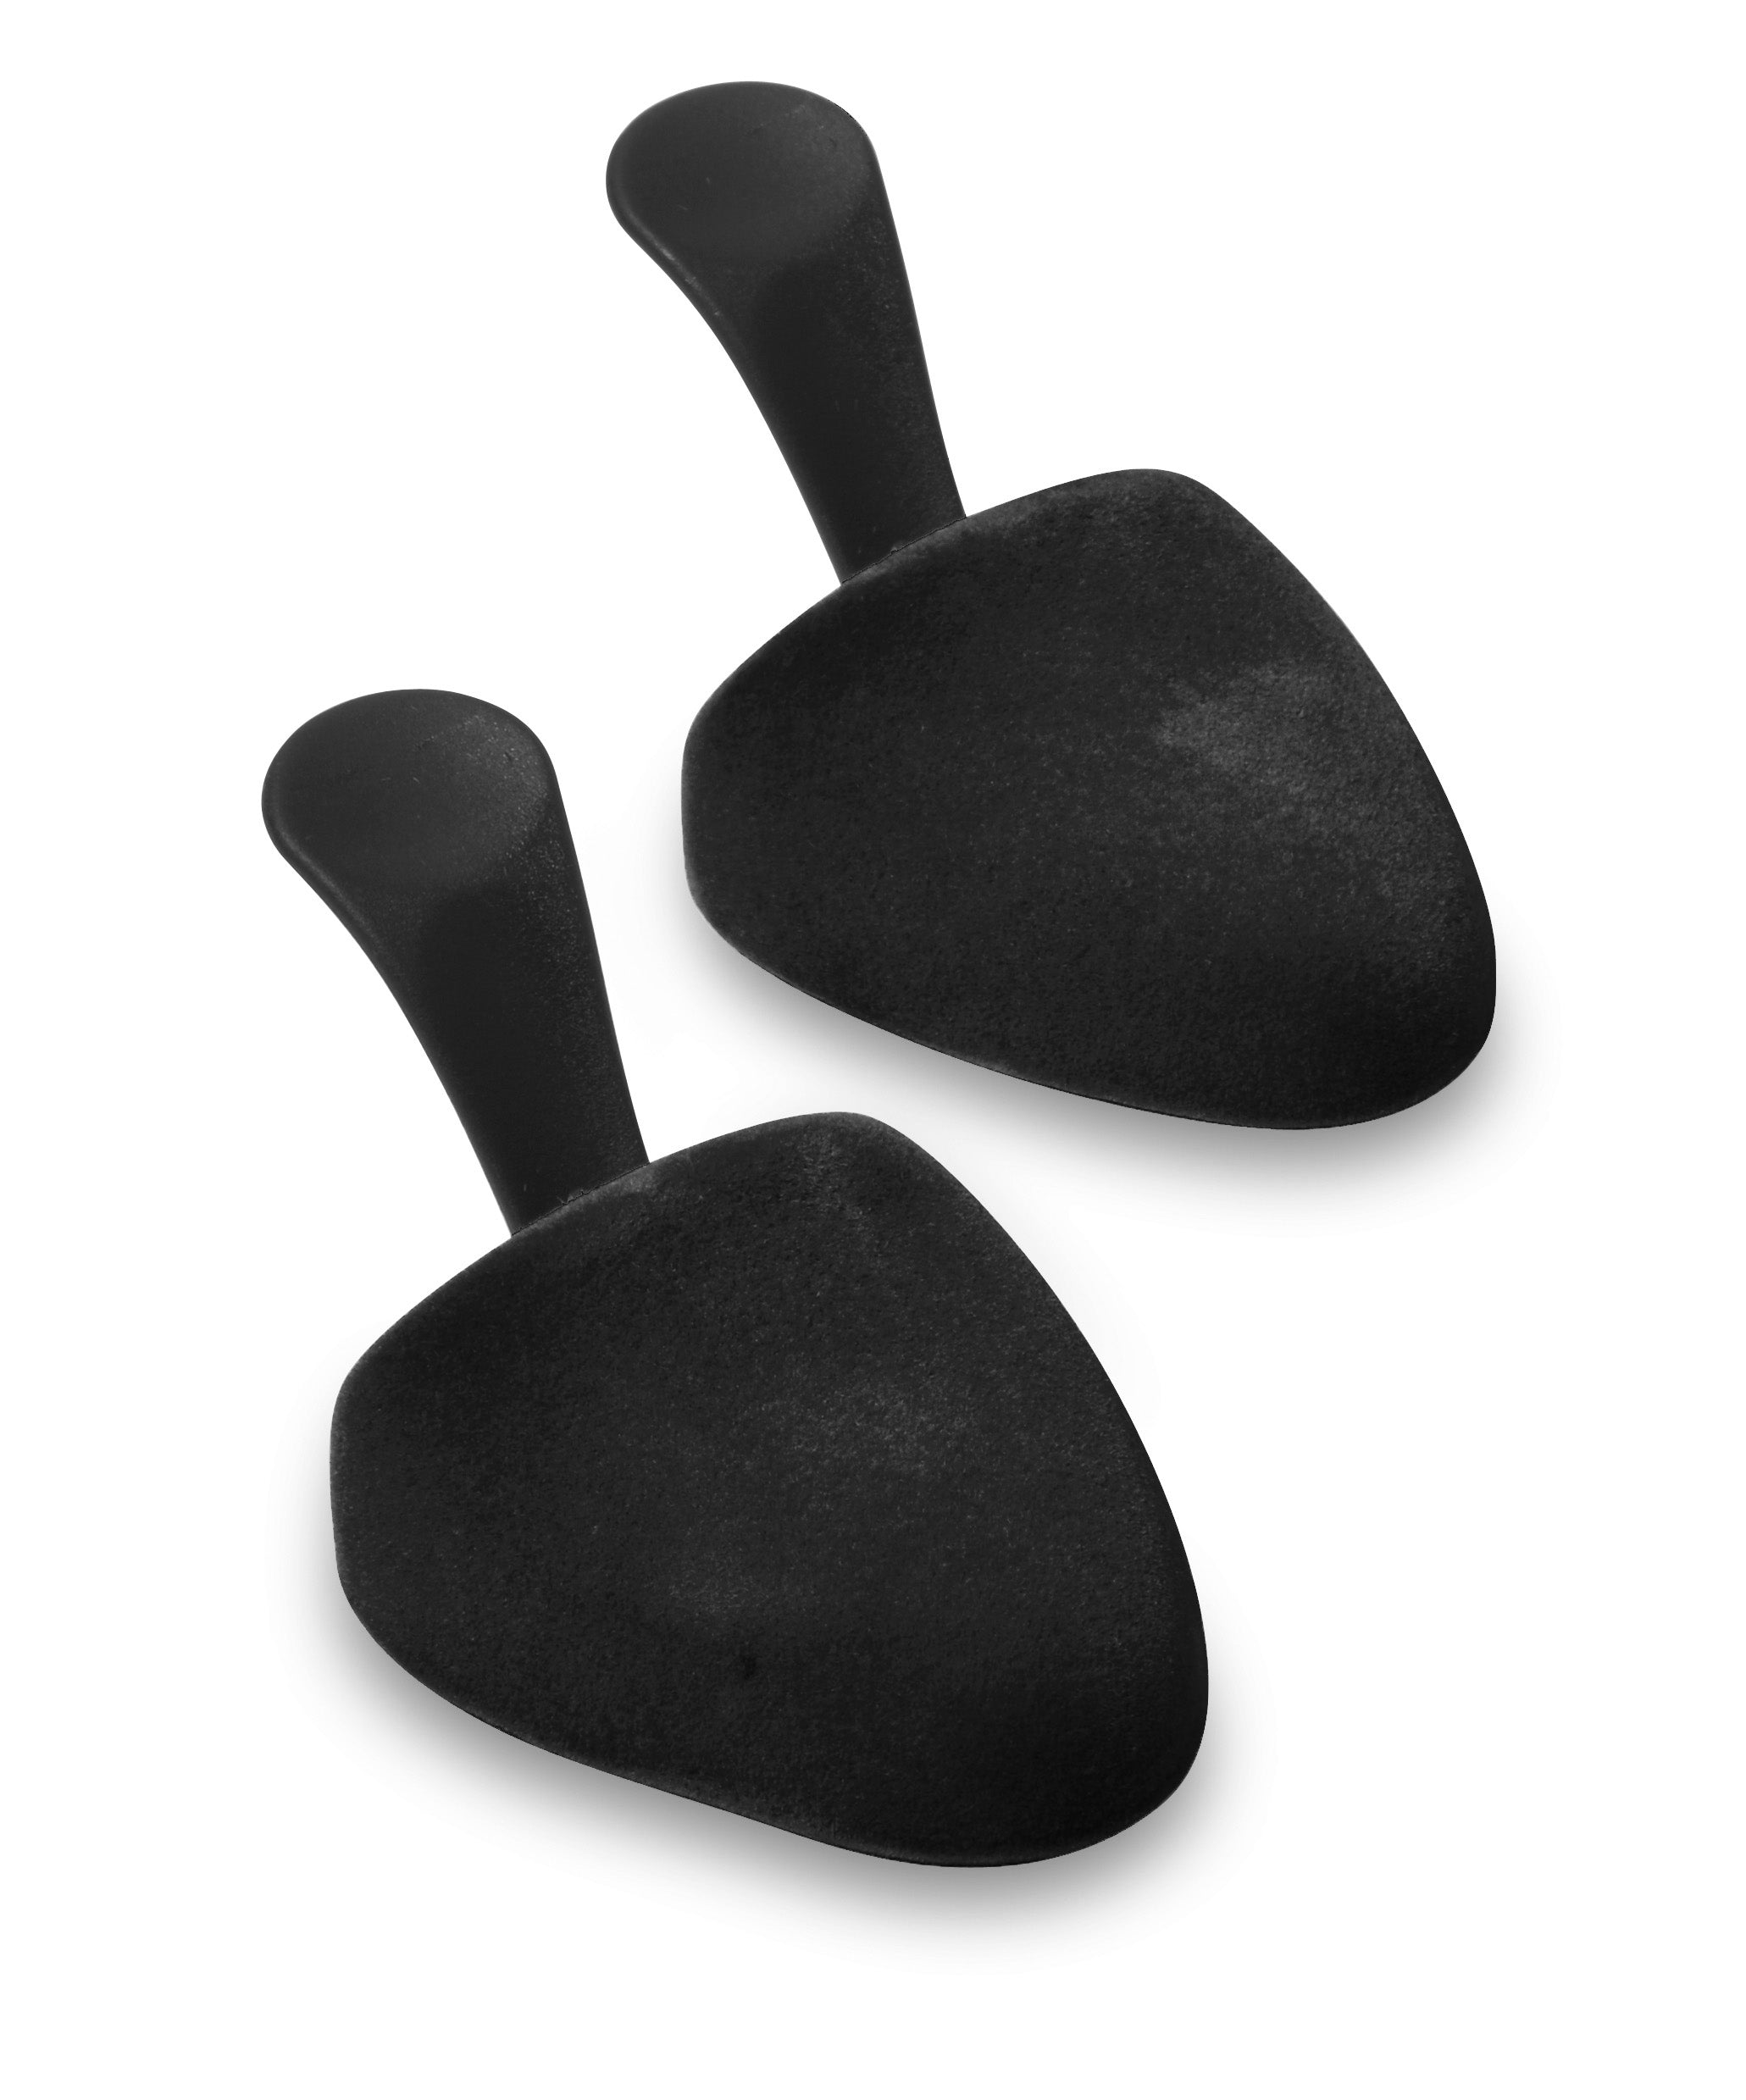 Black Shoe Shapers - Small